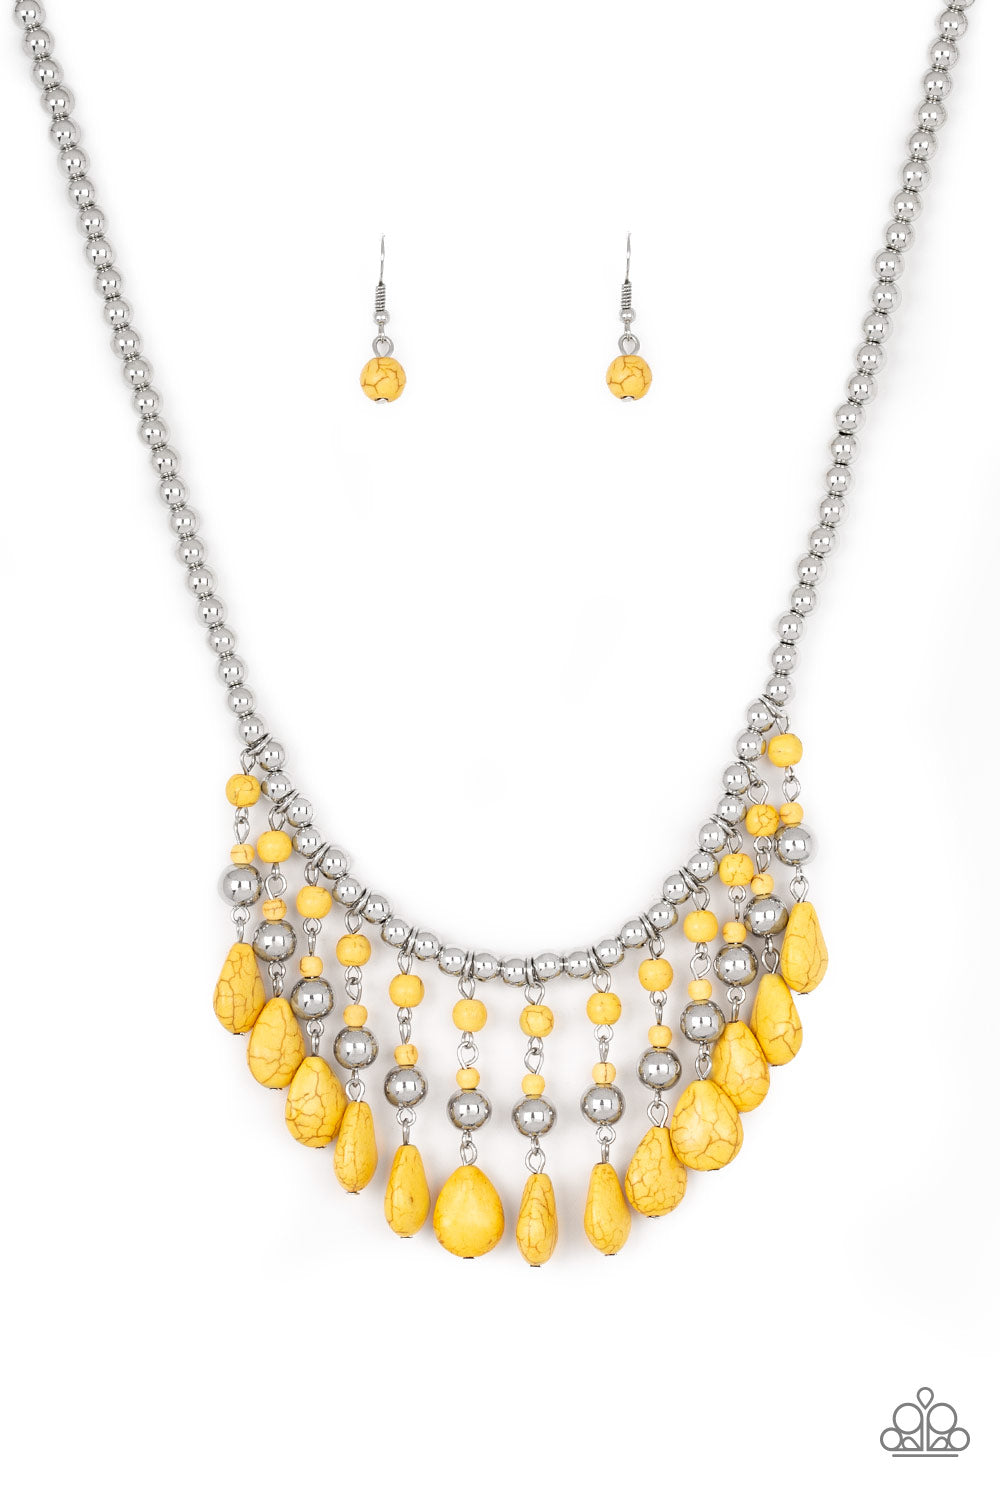 Yellow Rural Revival Necklace